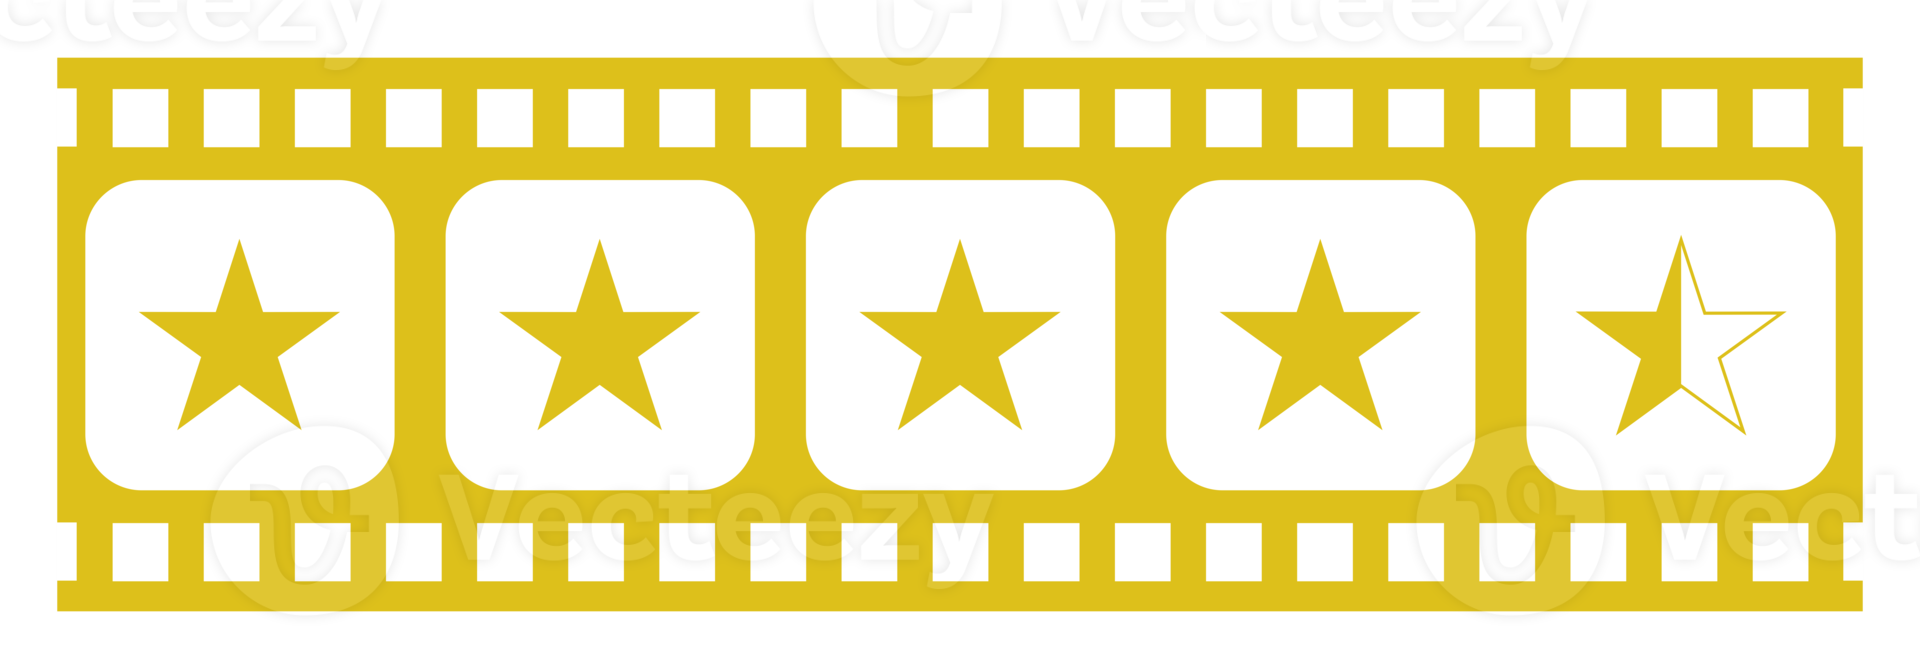 Visual of the Five 5 Star Sign in the Film Stripe Silhouette. Star Rating Icon Symbol for Film or Movie Review, Pictogram, Apps, Website or Graphic Design Element. Rating 4,5 Star. Format PNG